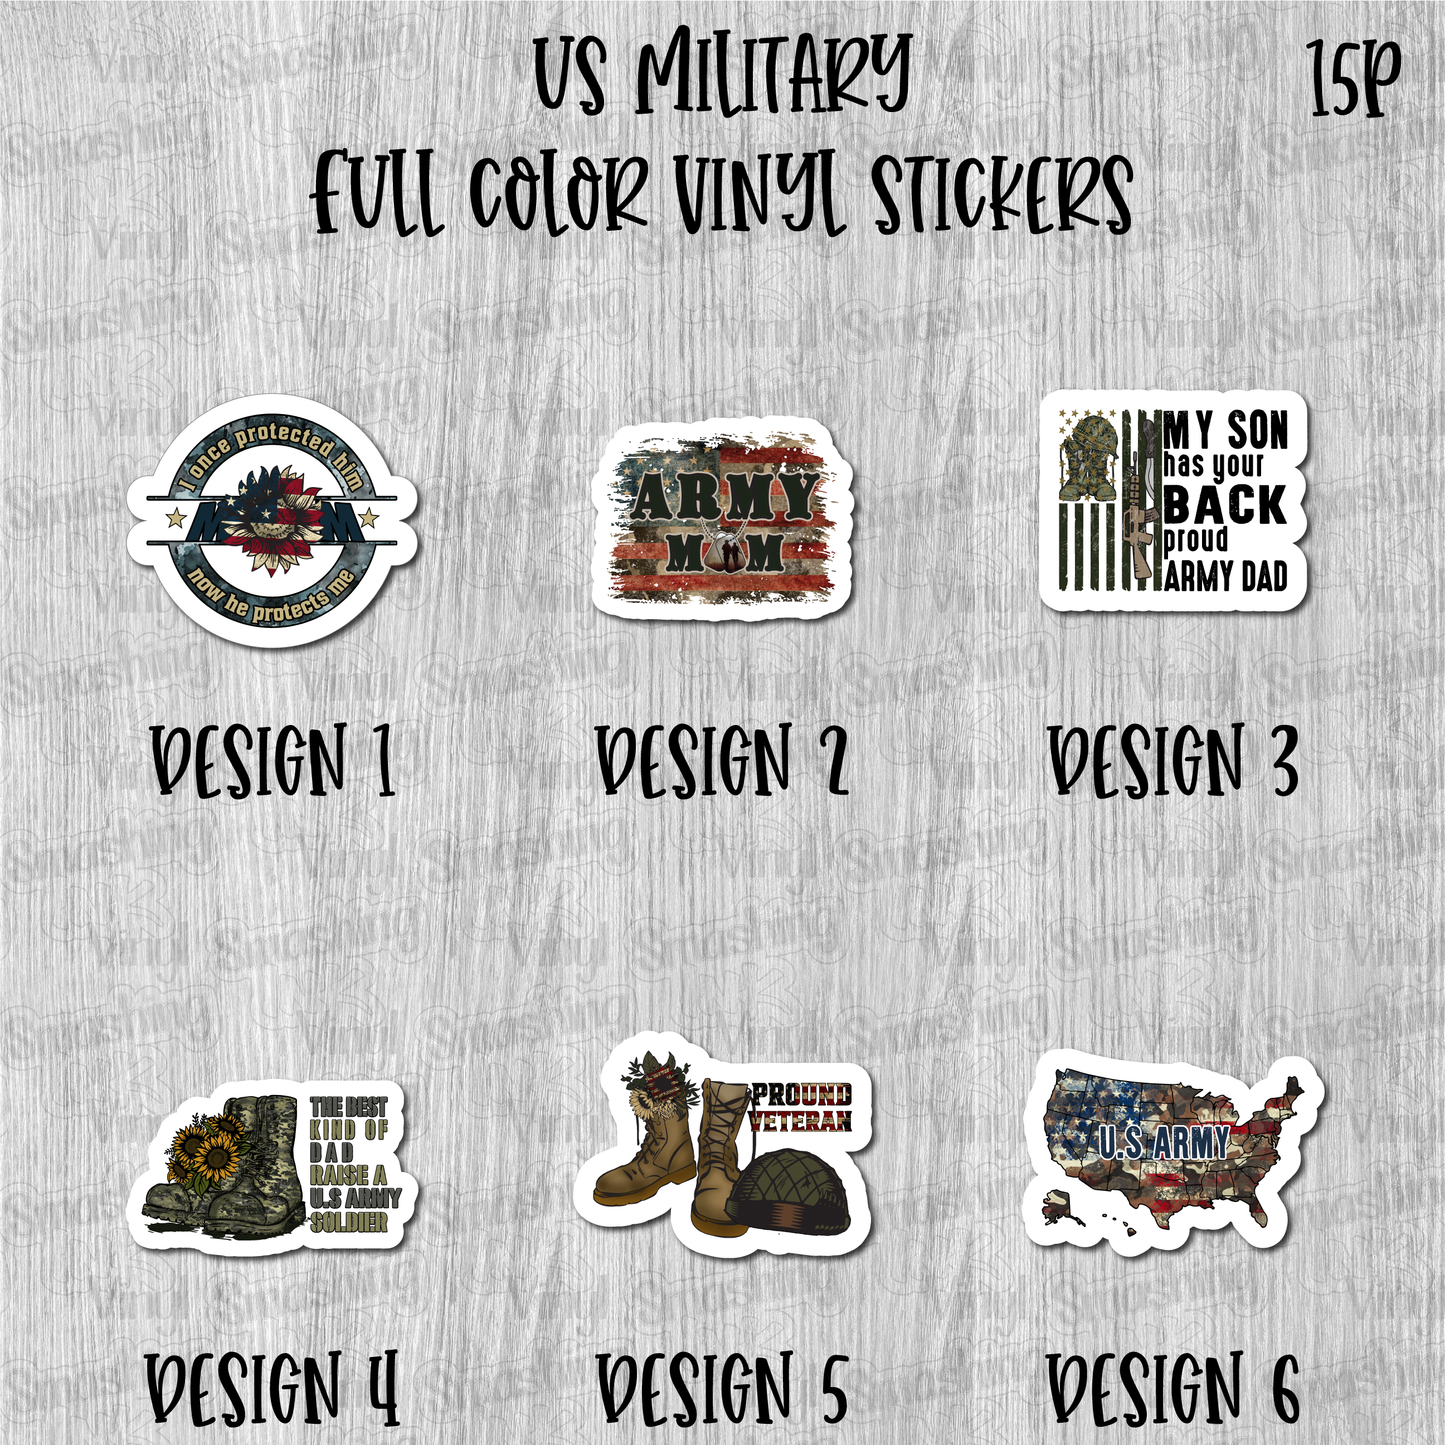 US Military - Full Color Vinyl Stickers (SHIPS IN 3-7 BUS DAYS)